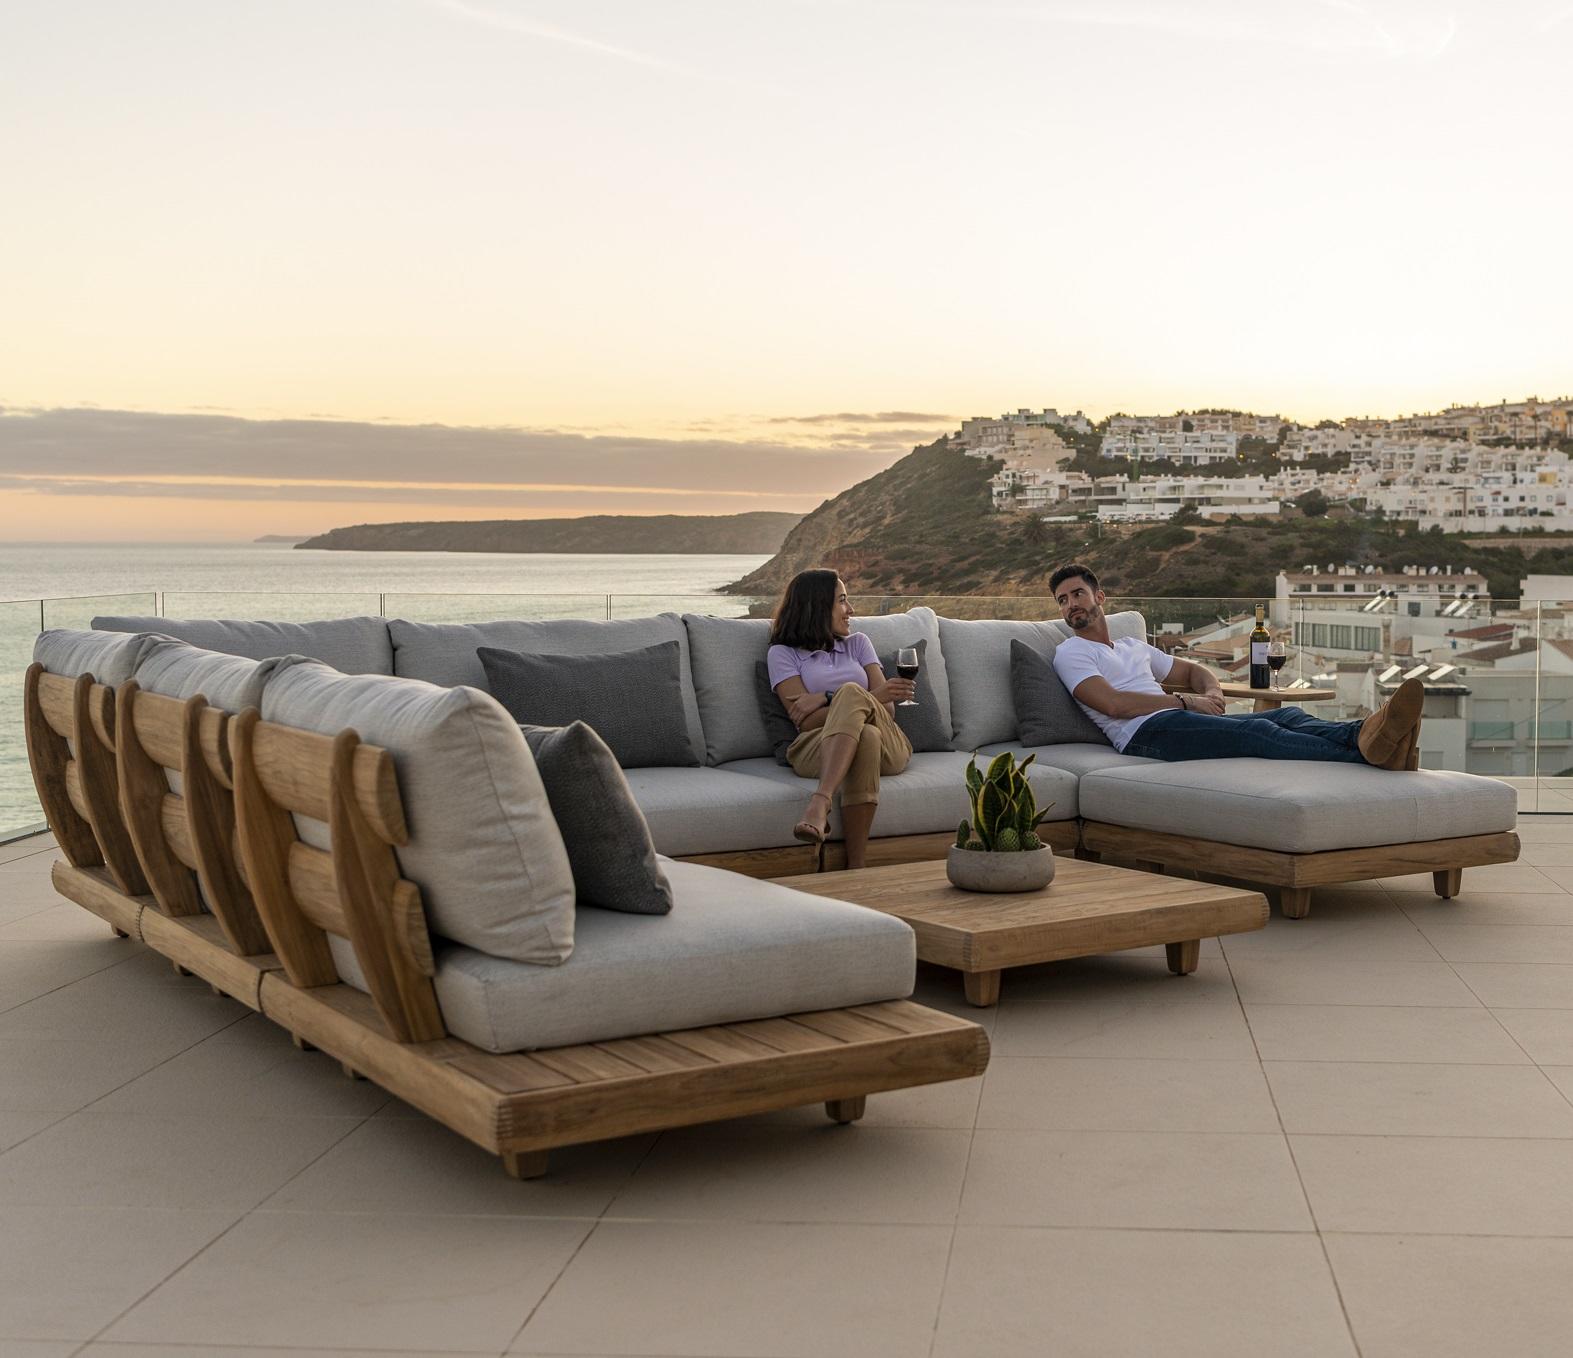 Create A Cozy Outdoor Seating Area With A Teak Sofa